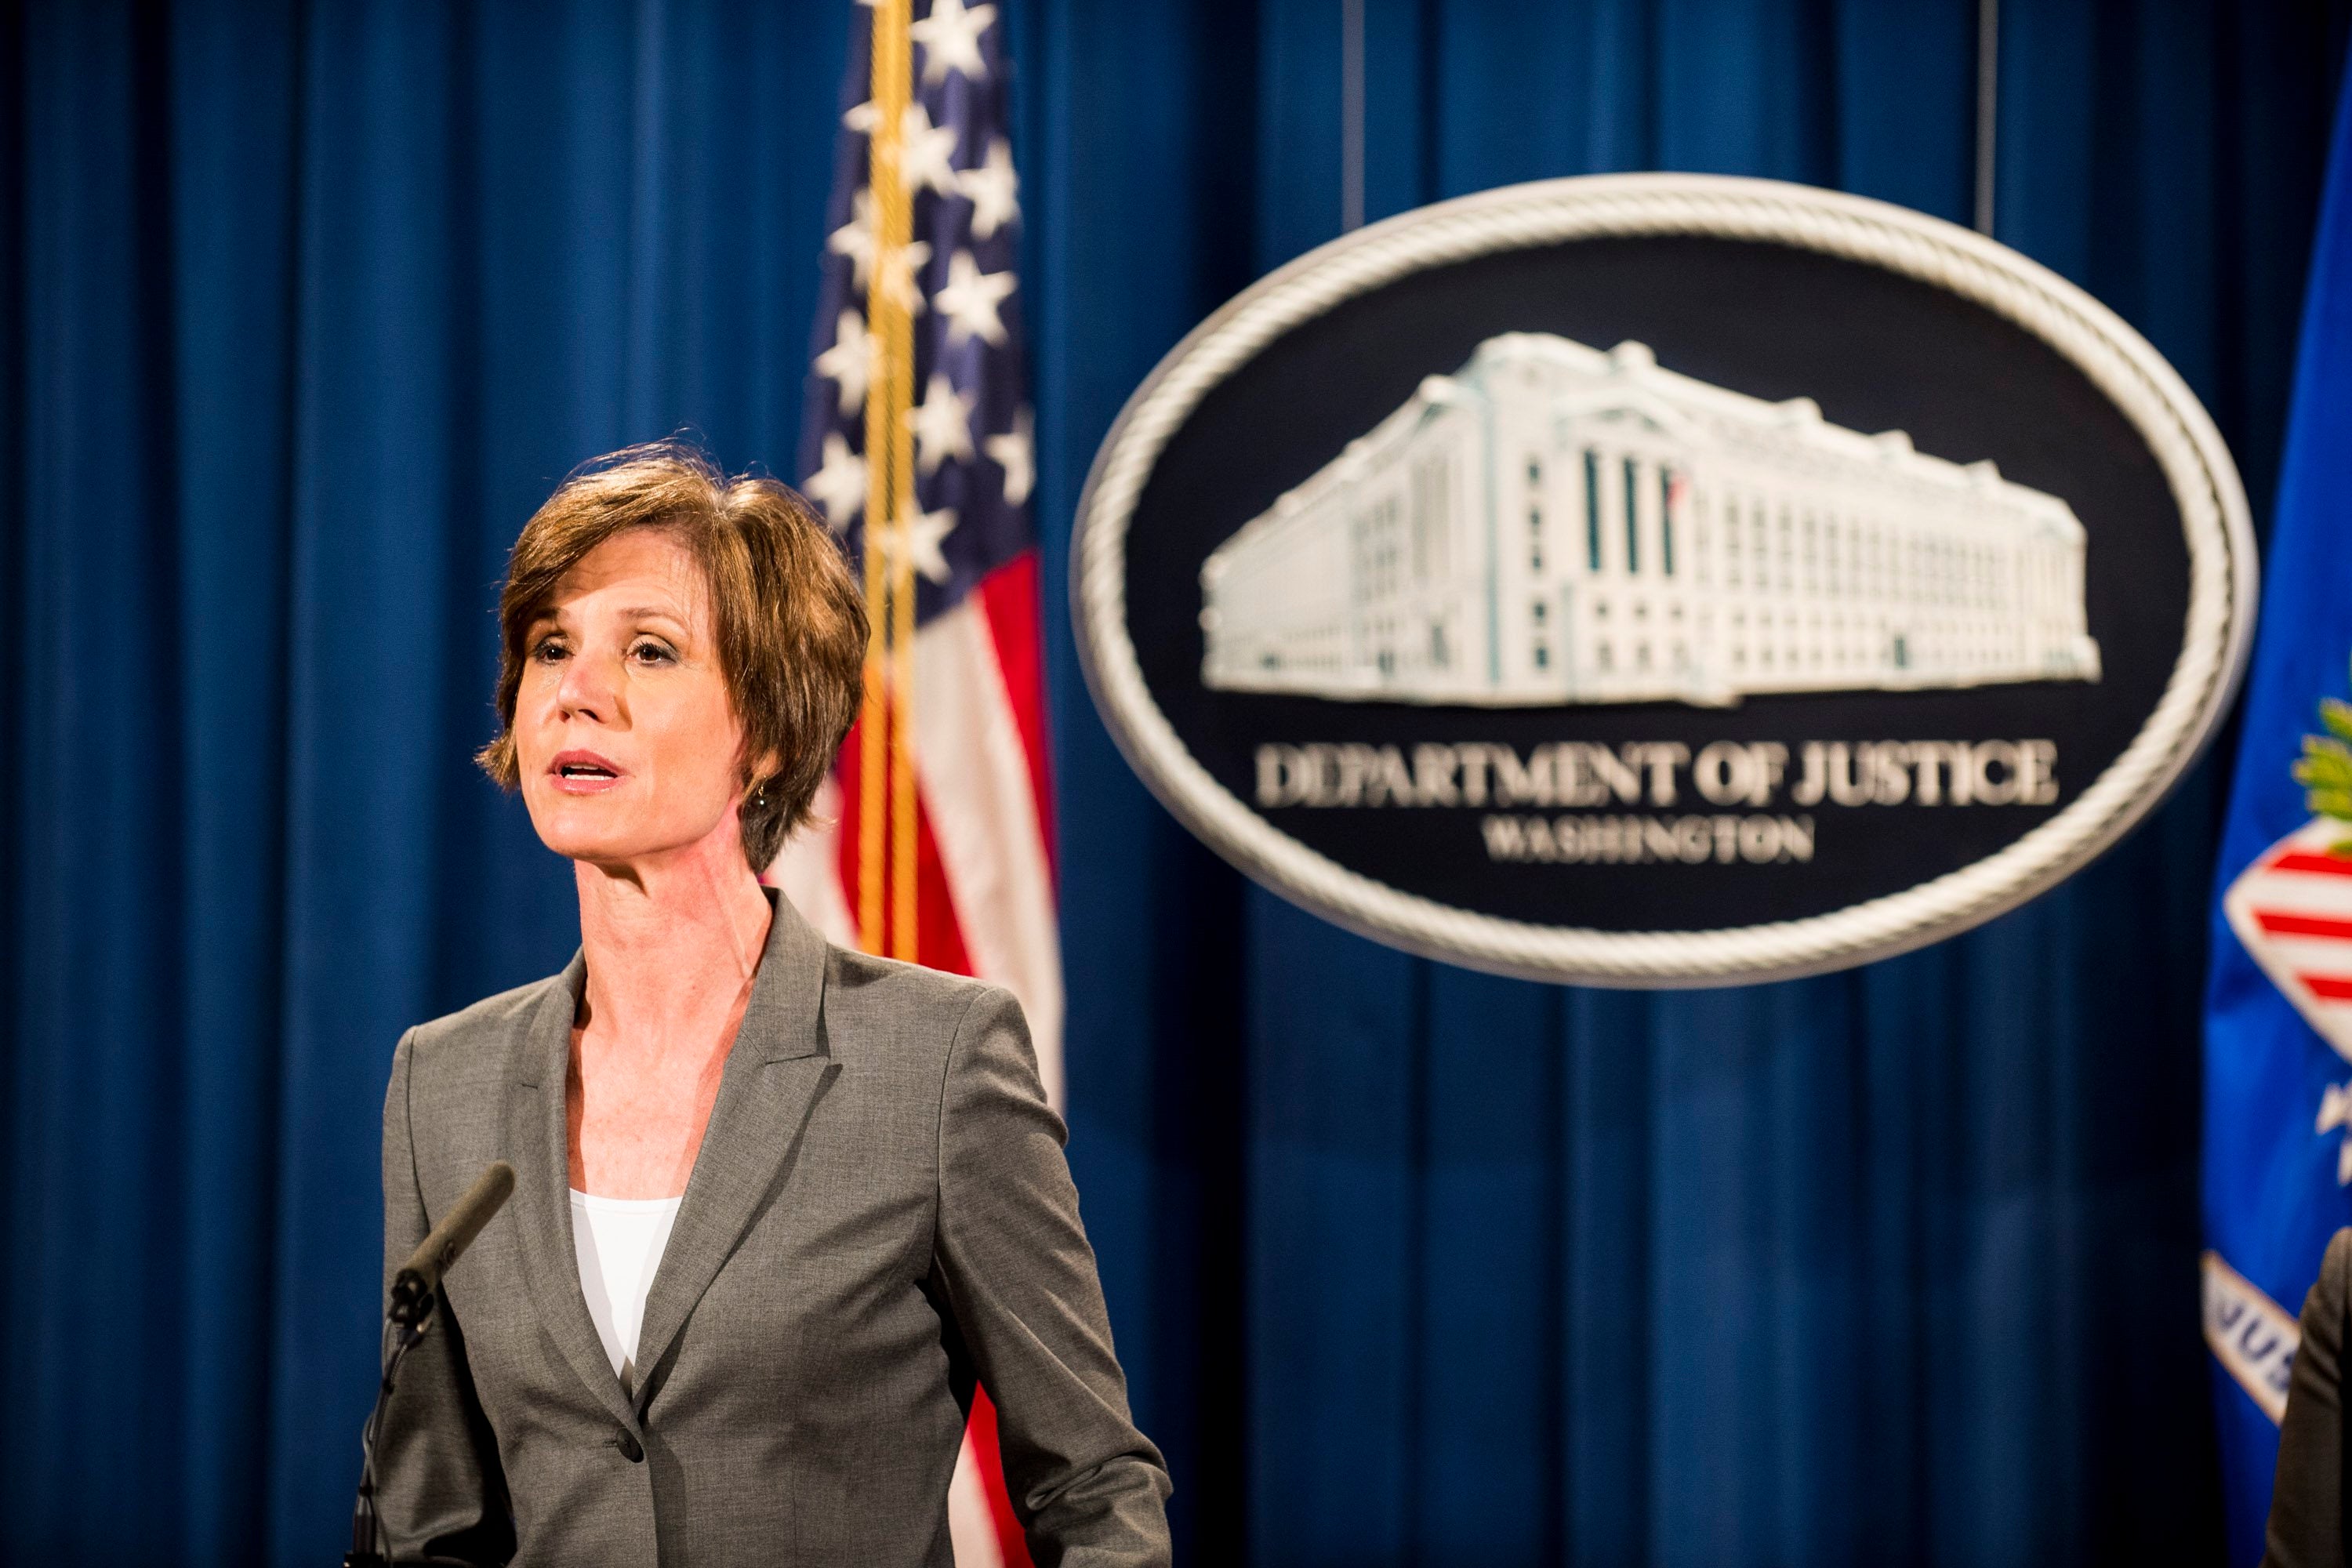 President Trump Fires Acting Attorney General Sally Yates After She Defied Immigration Order
